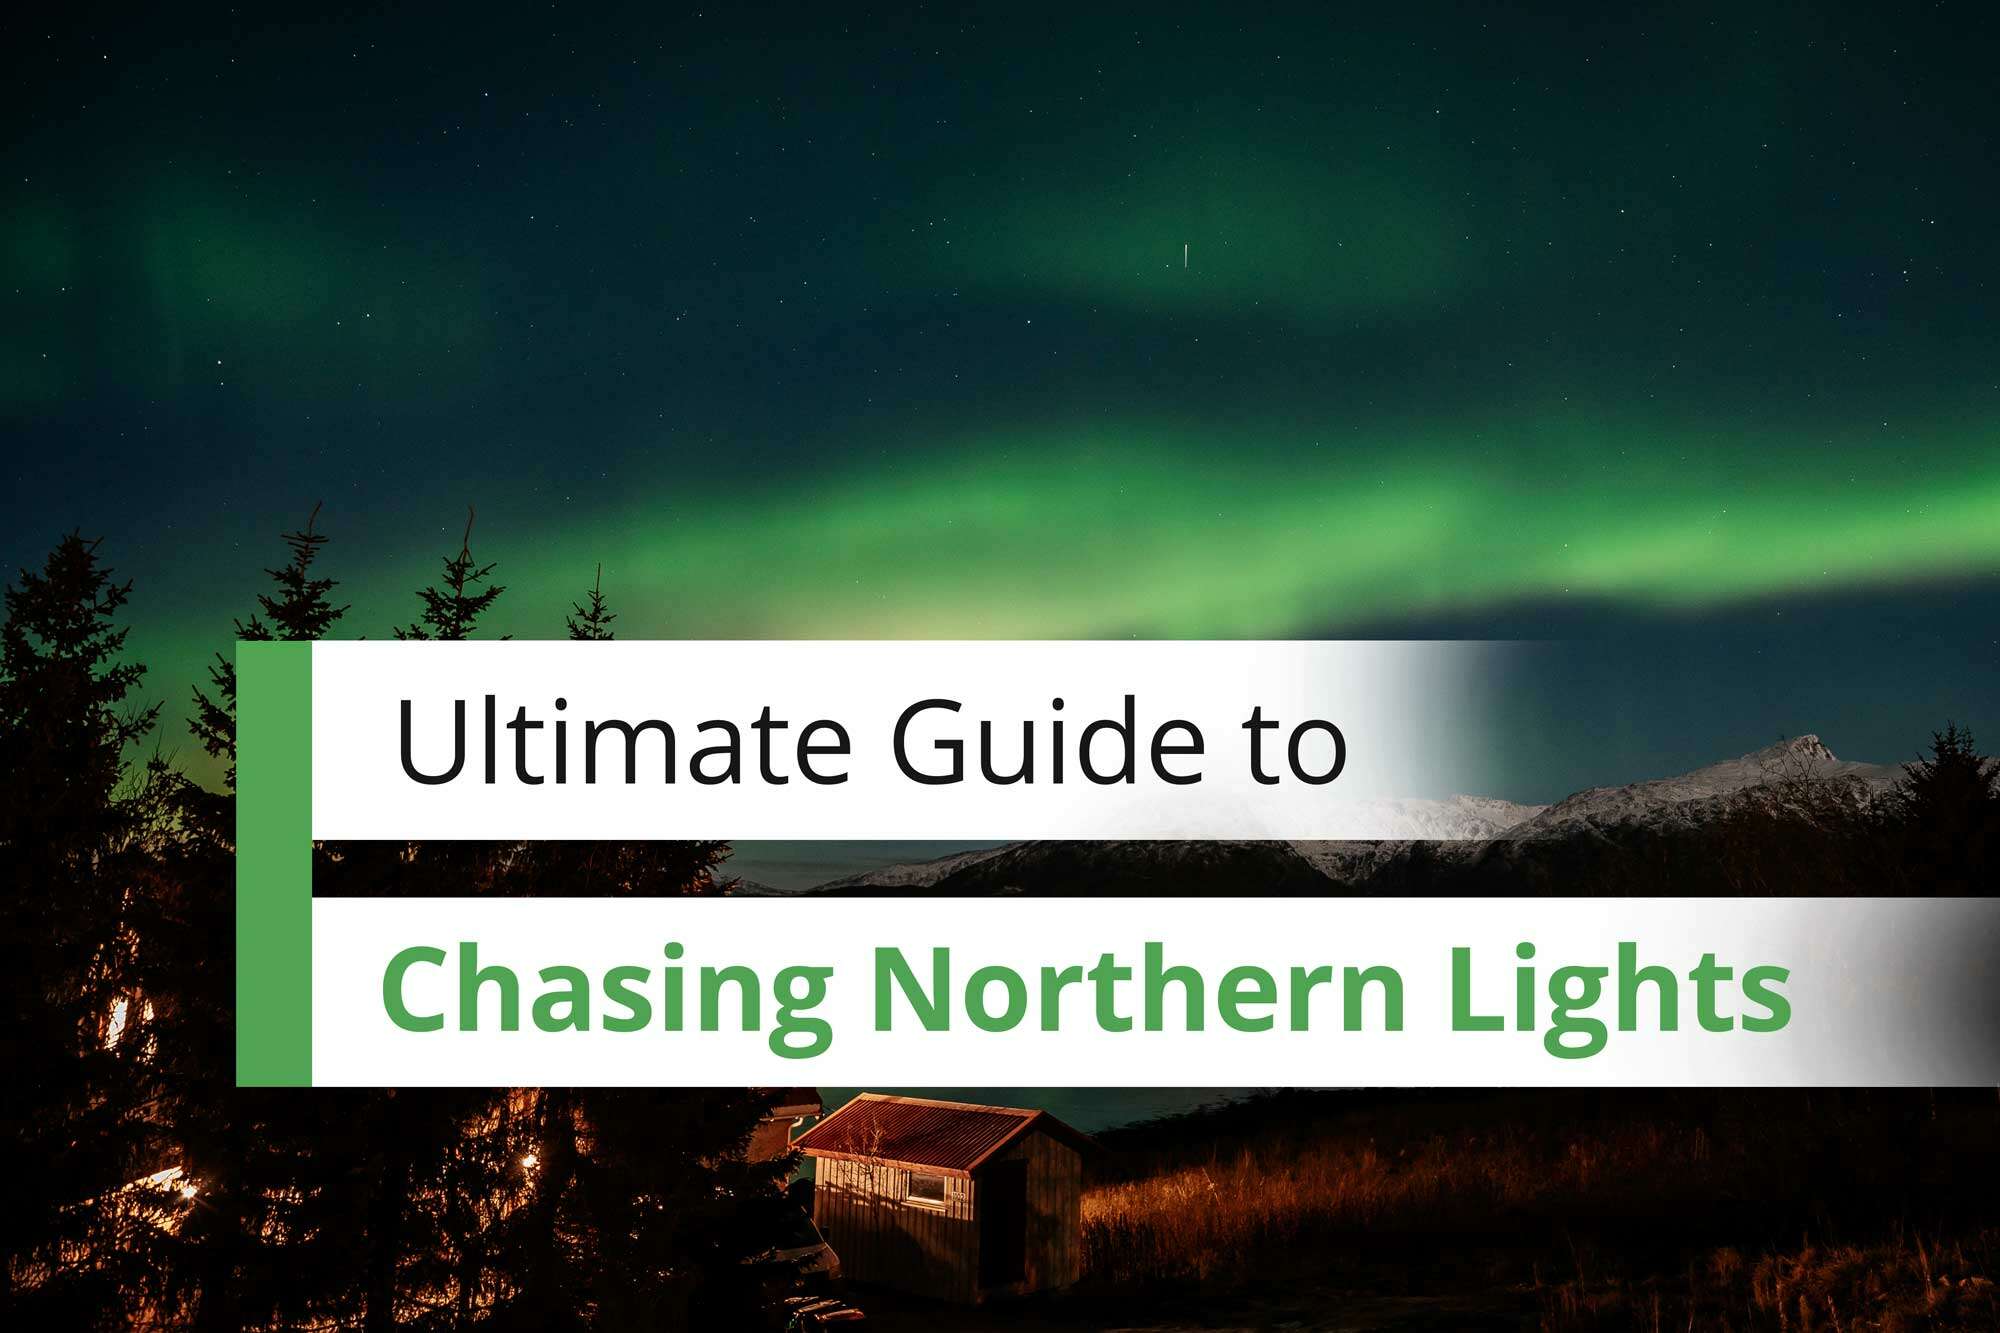 Northern Lights Finland: The 5 Best Places to See the Aurora